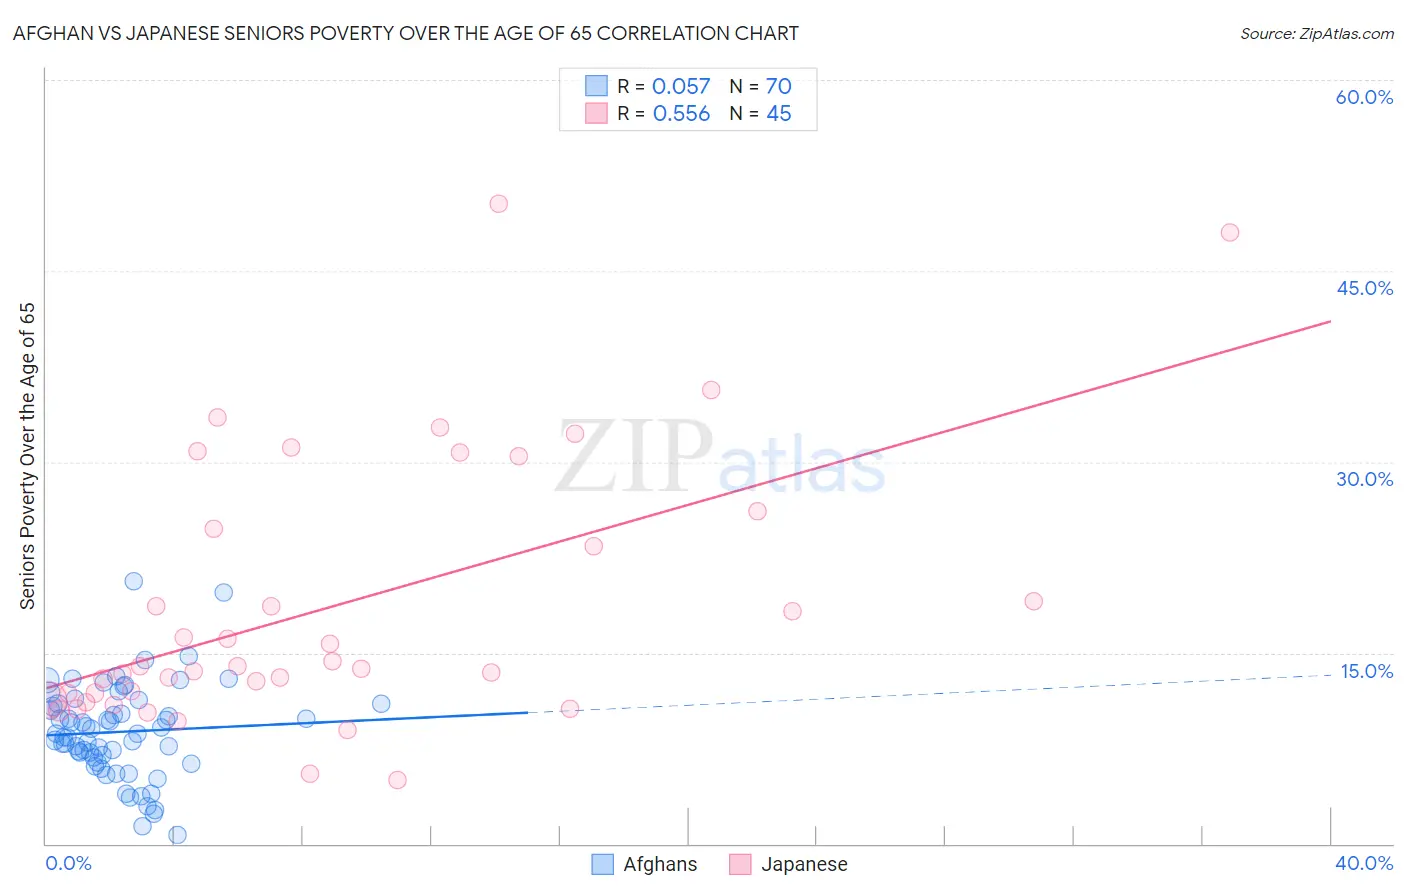 Afghan vs Japanese Seniors Poverty Over the Age of 65